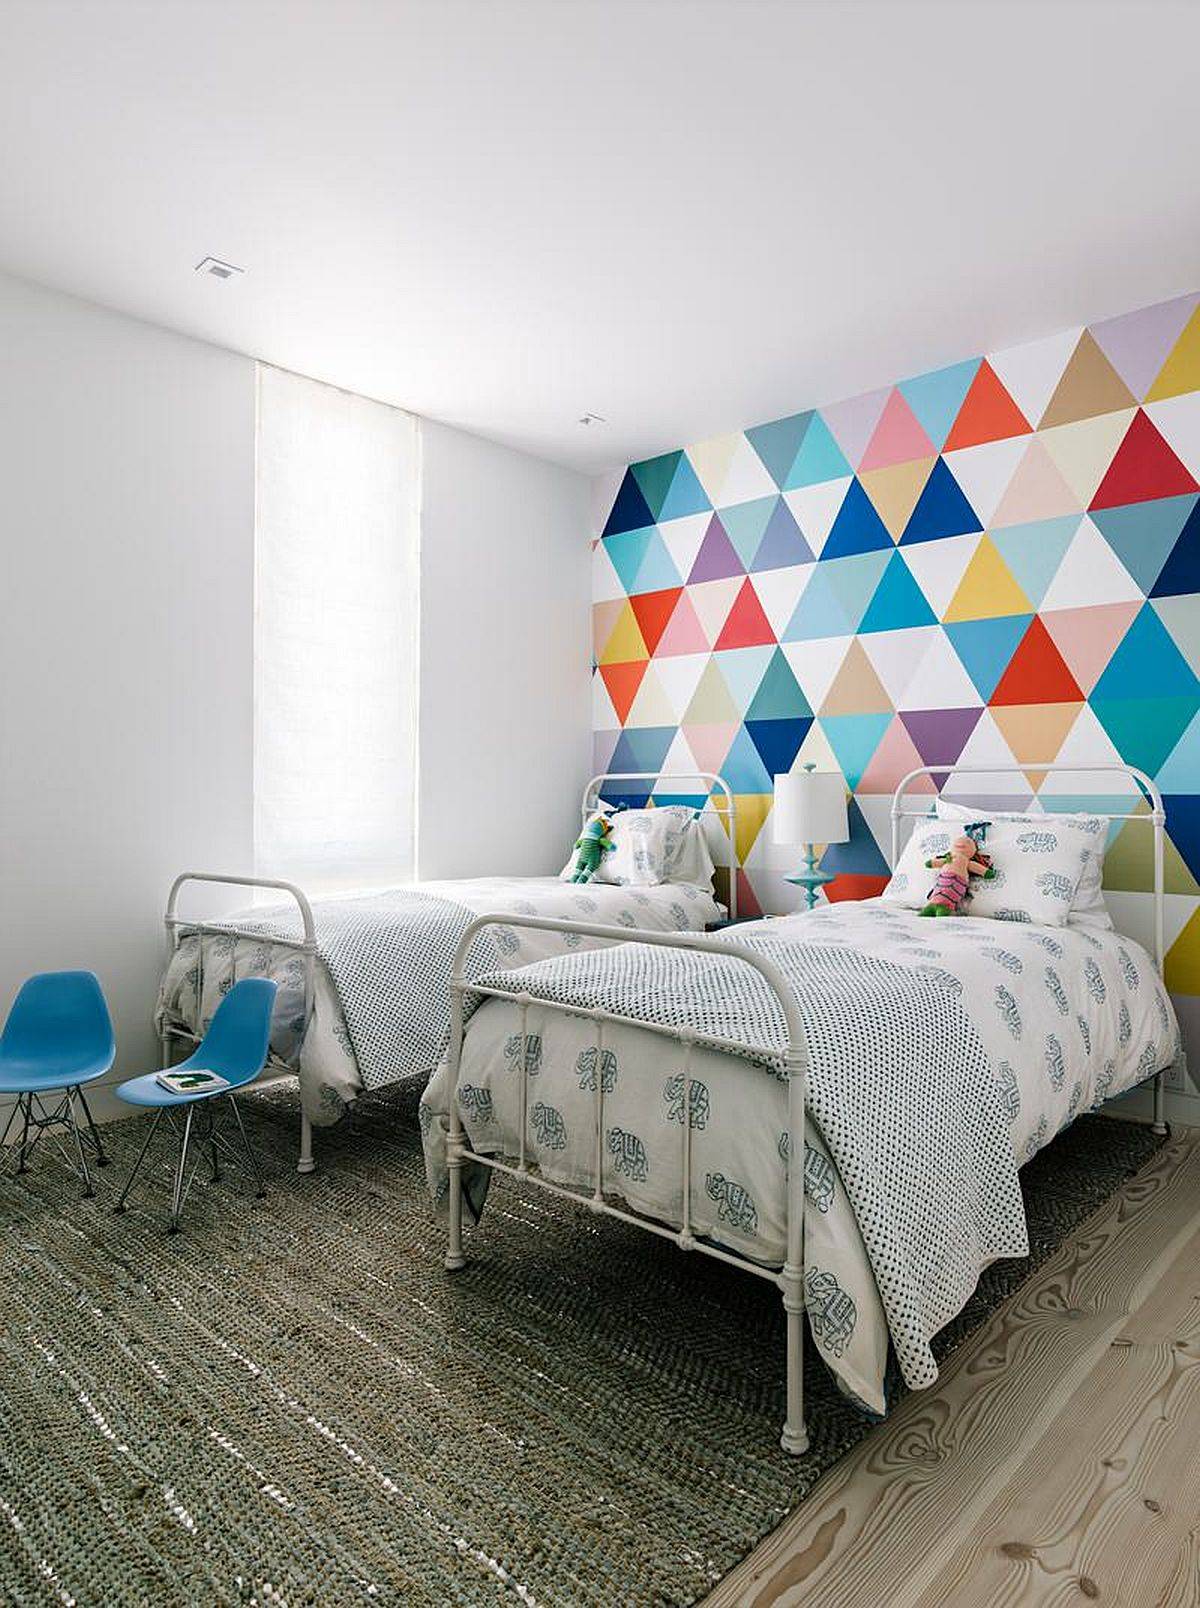 Vivacious-multi-colored-geometric-accent-wall-for-the-teen-bedroom-15669